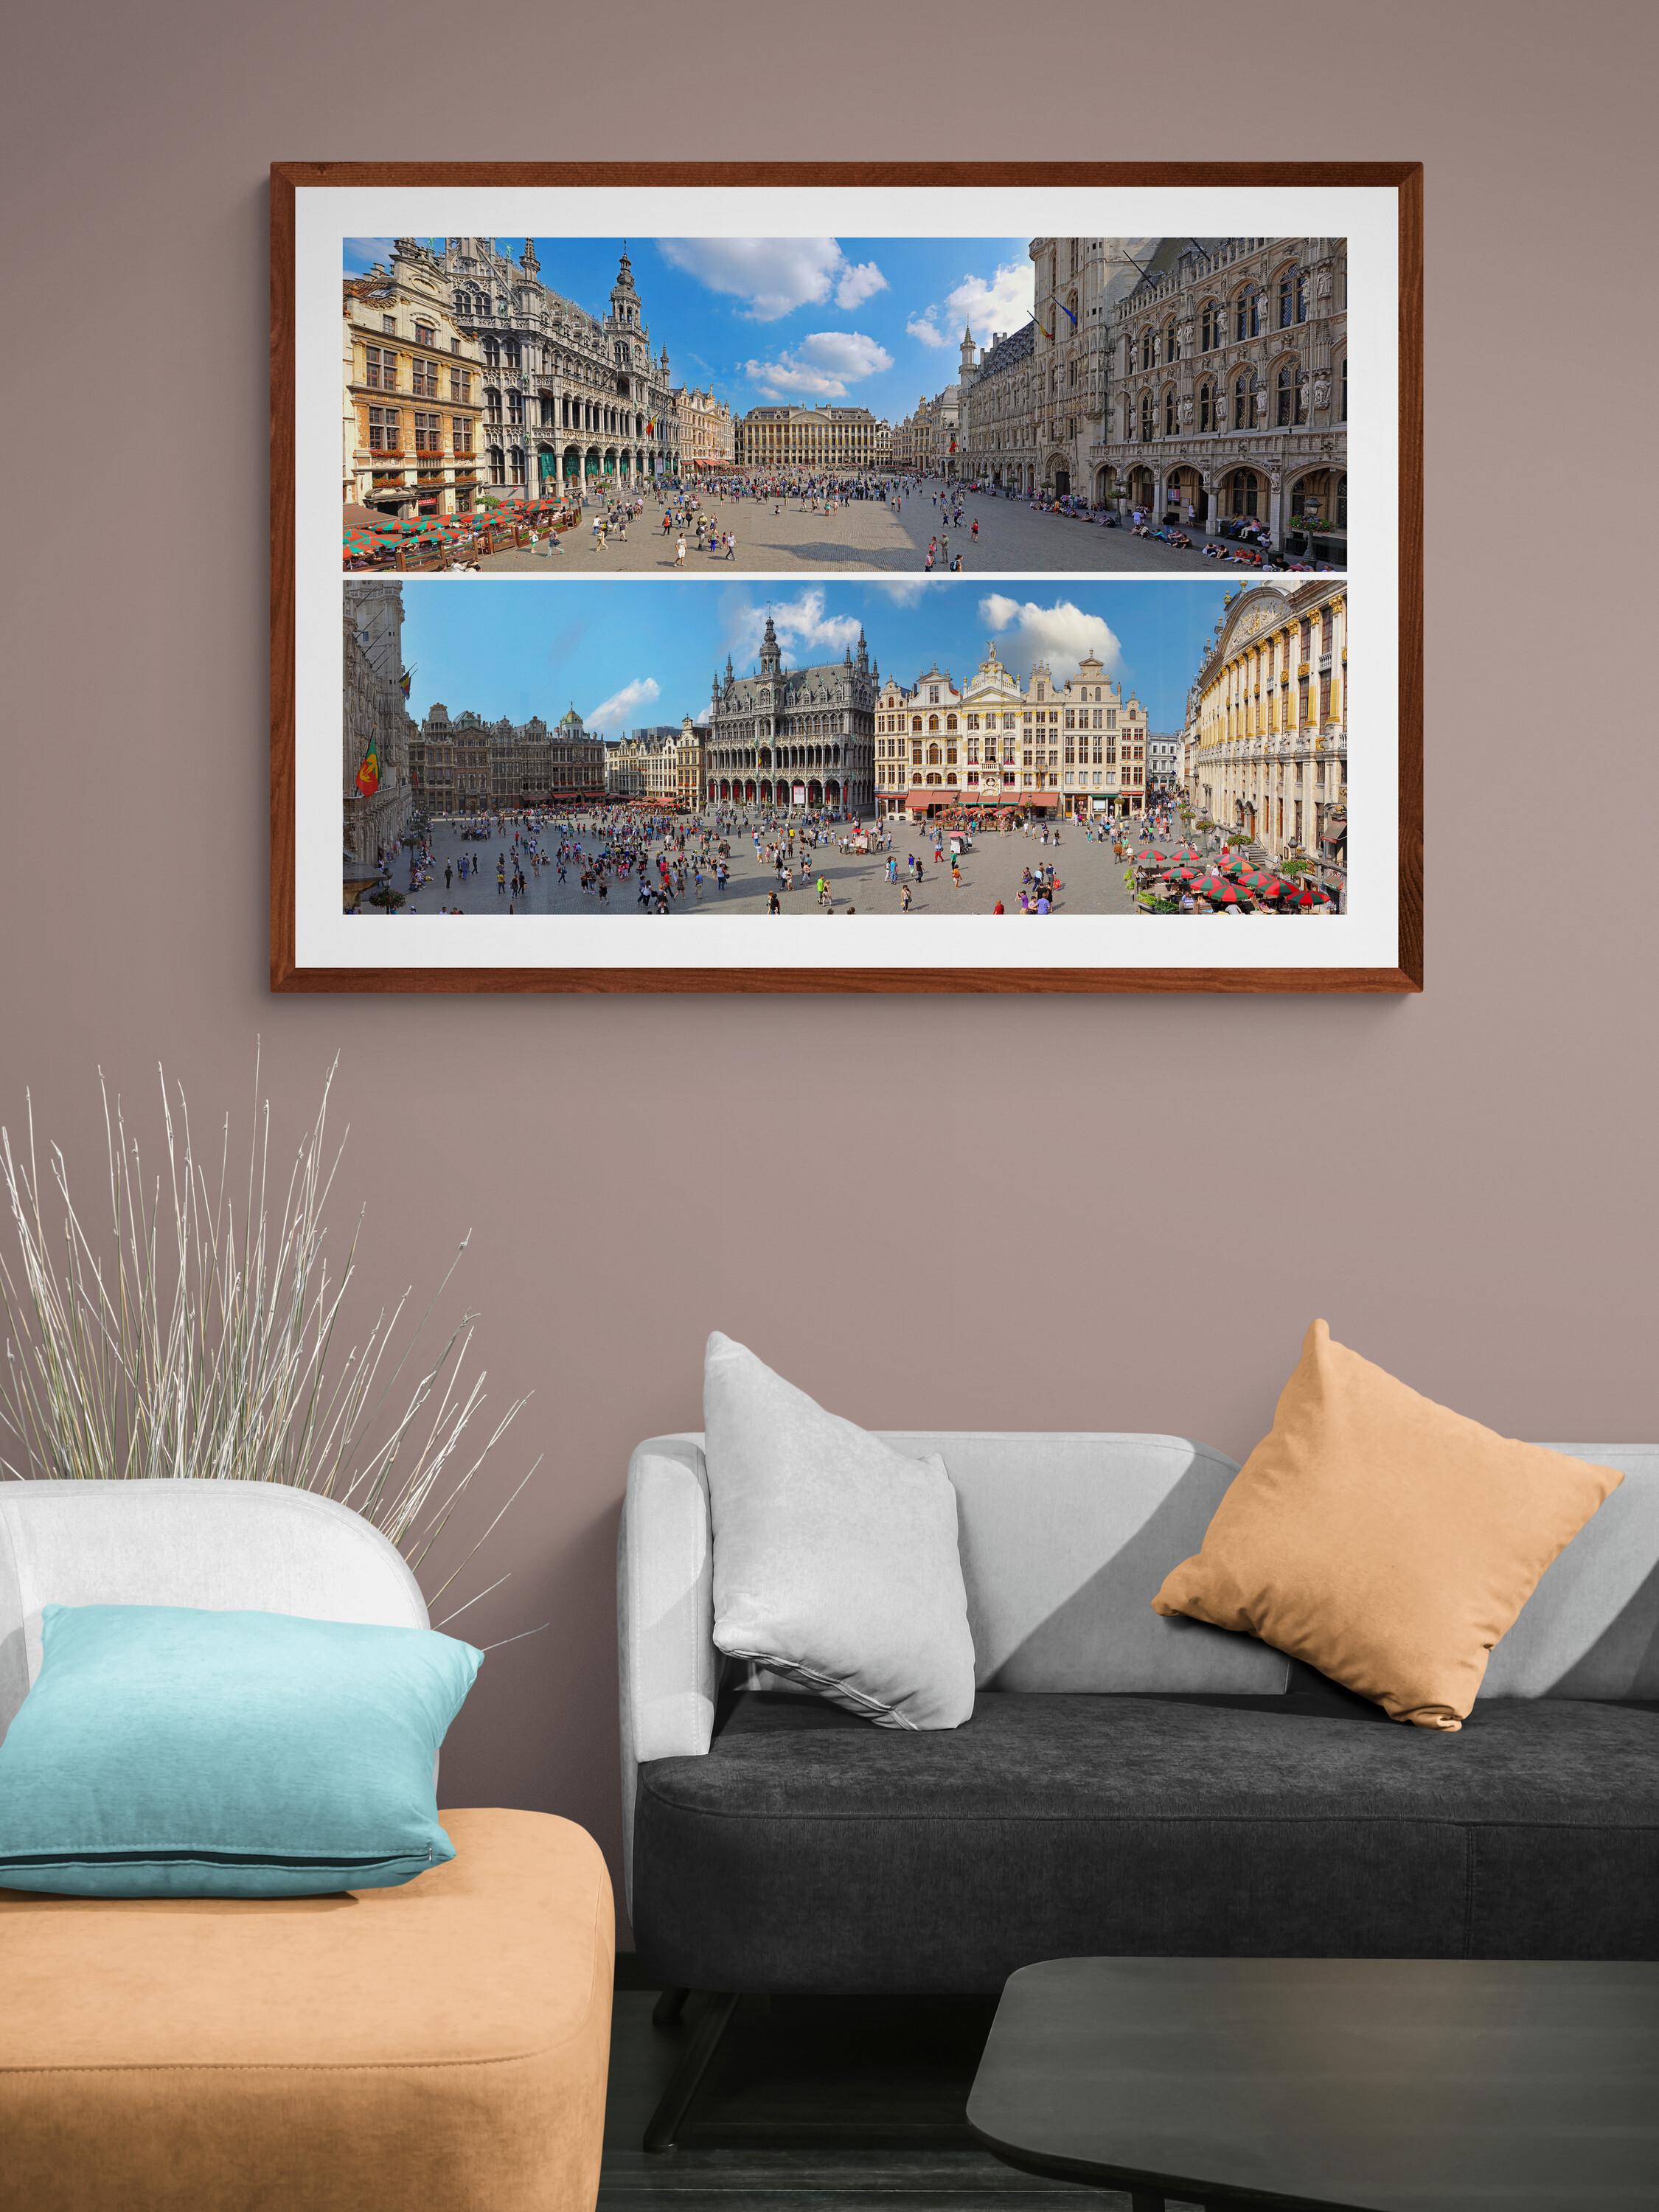 The Grand Place of Brussel - 2013 - Full Framed color panoramic photography  - Photorealist Photograph by Jean Pierre De Neef